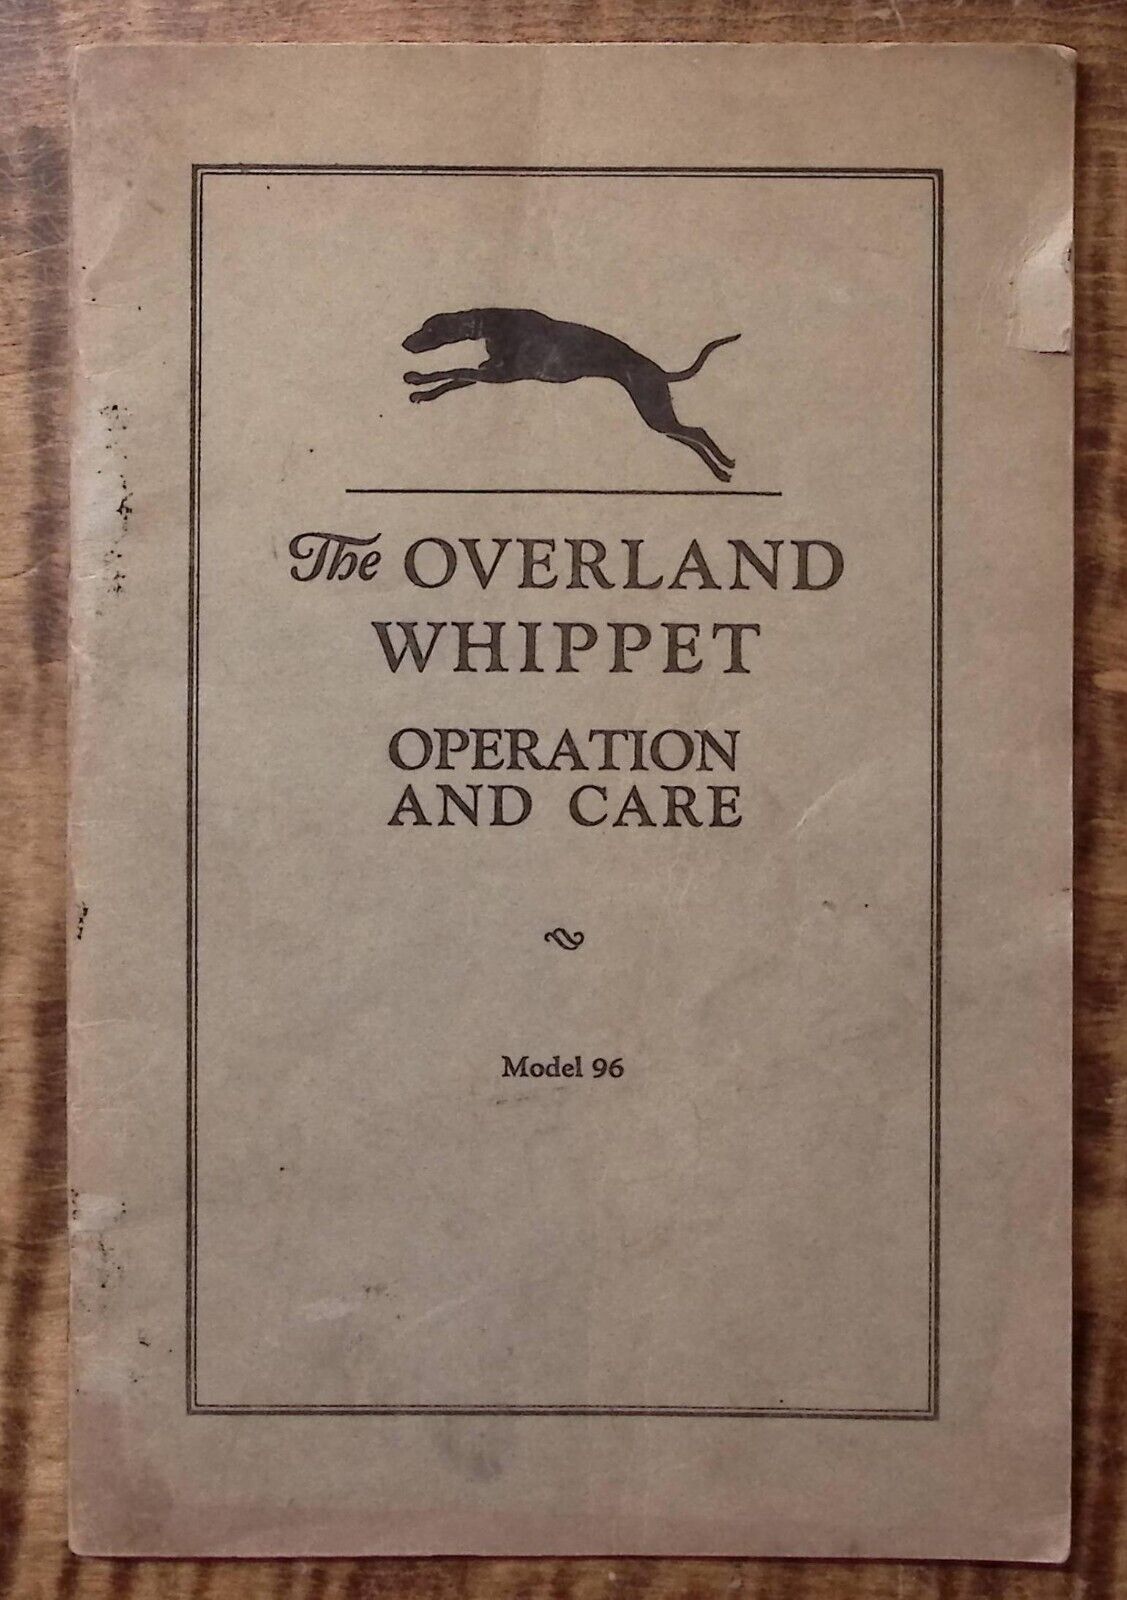 1927 THE OVERLAND WHIPPET OPERATION AND CARE MODEL 96 OWNERS MANUAL Z5195